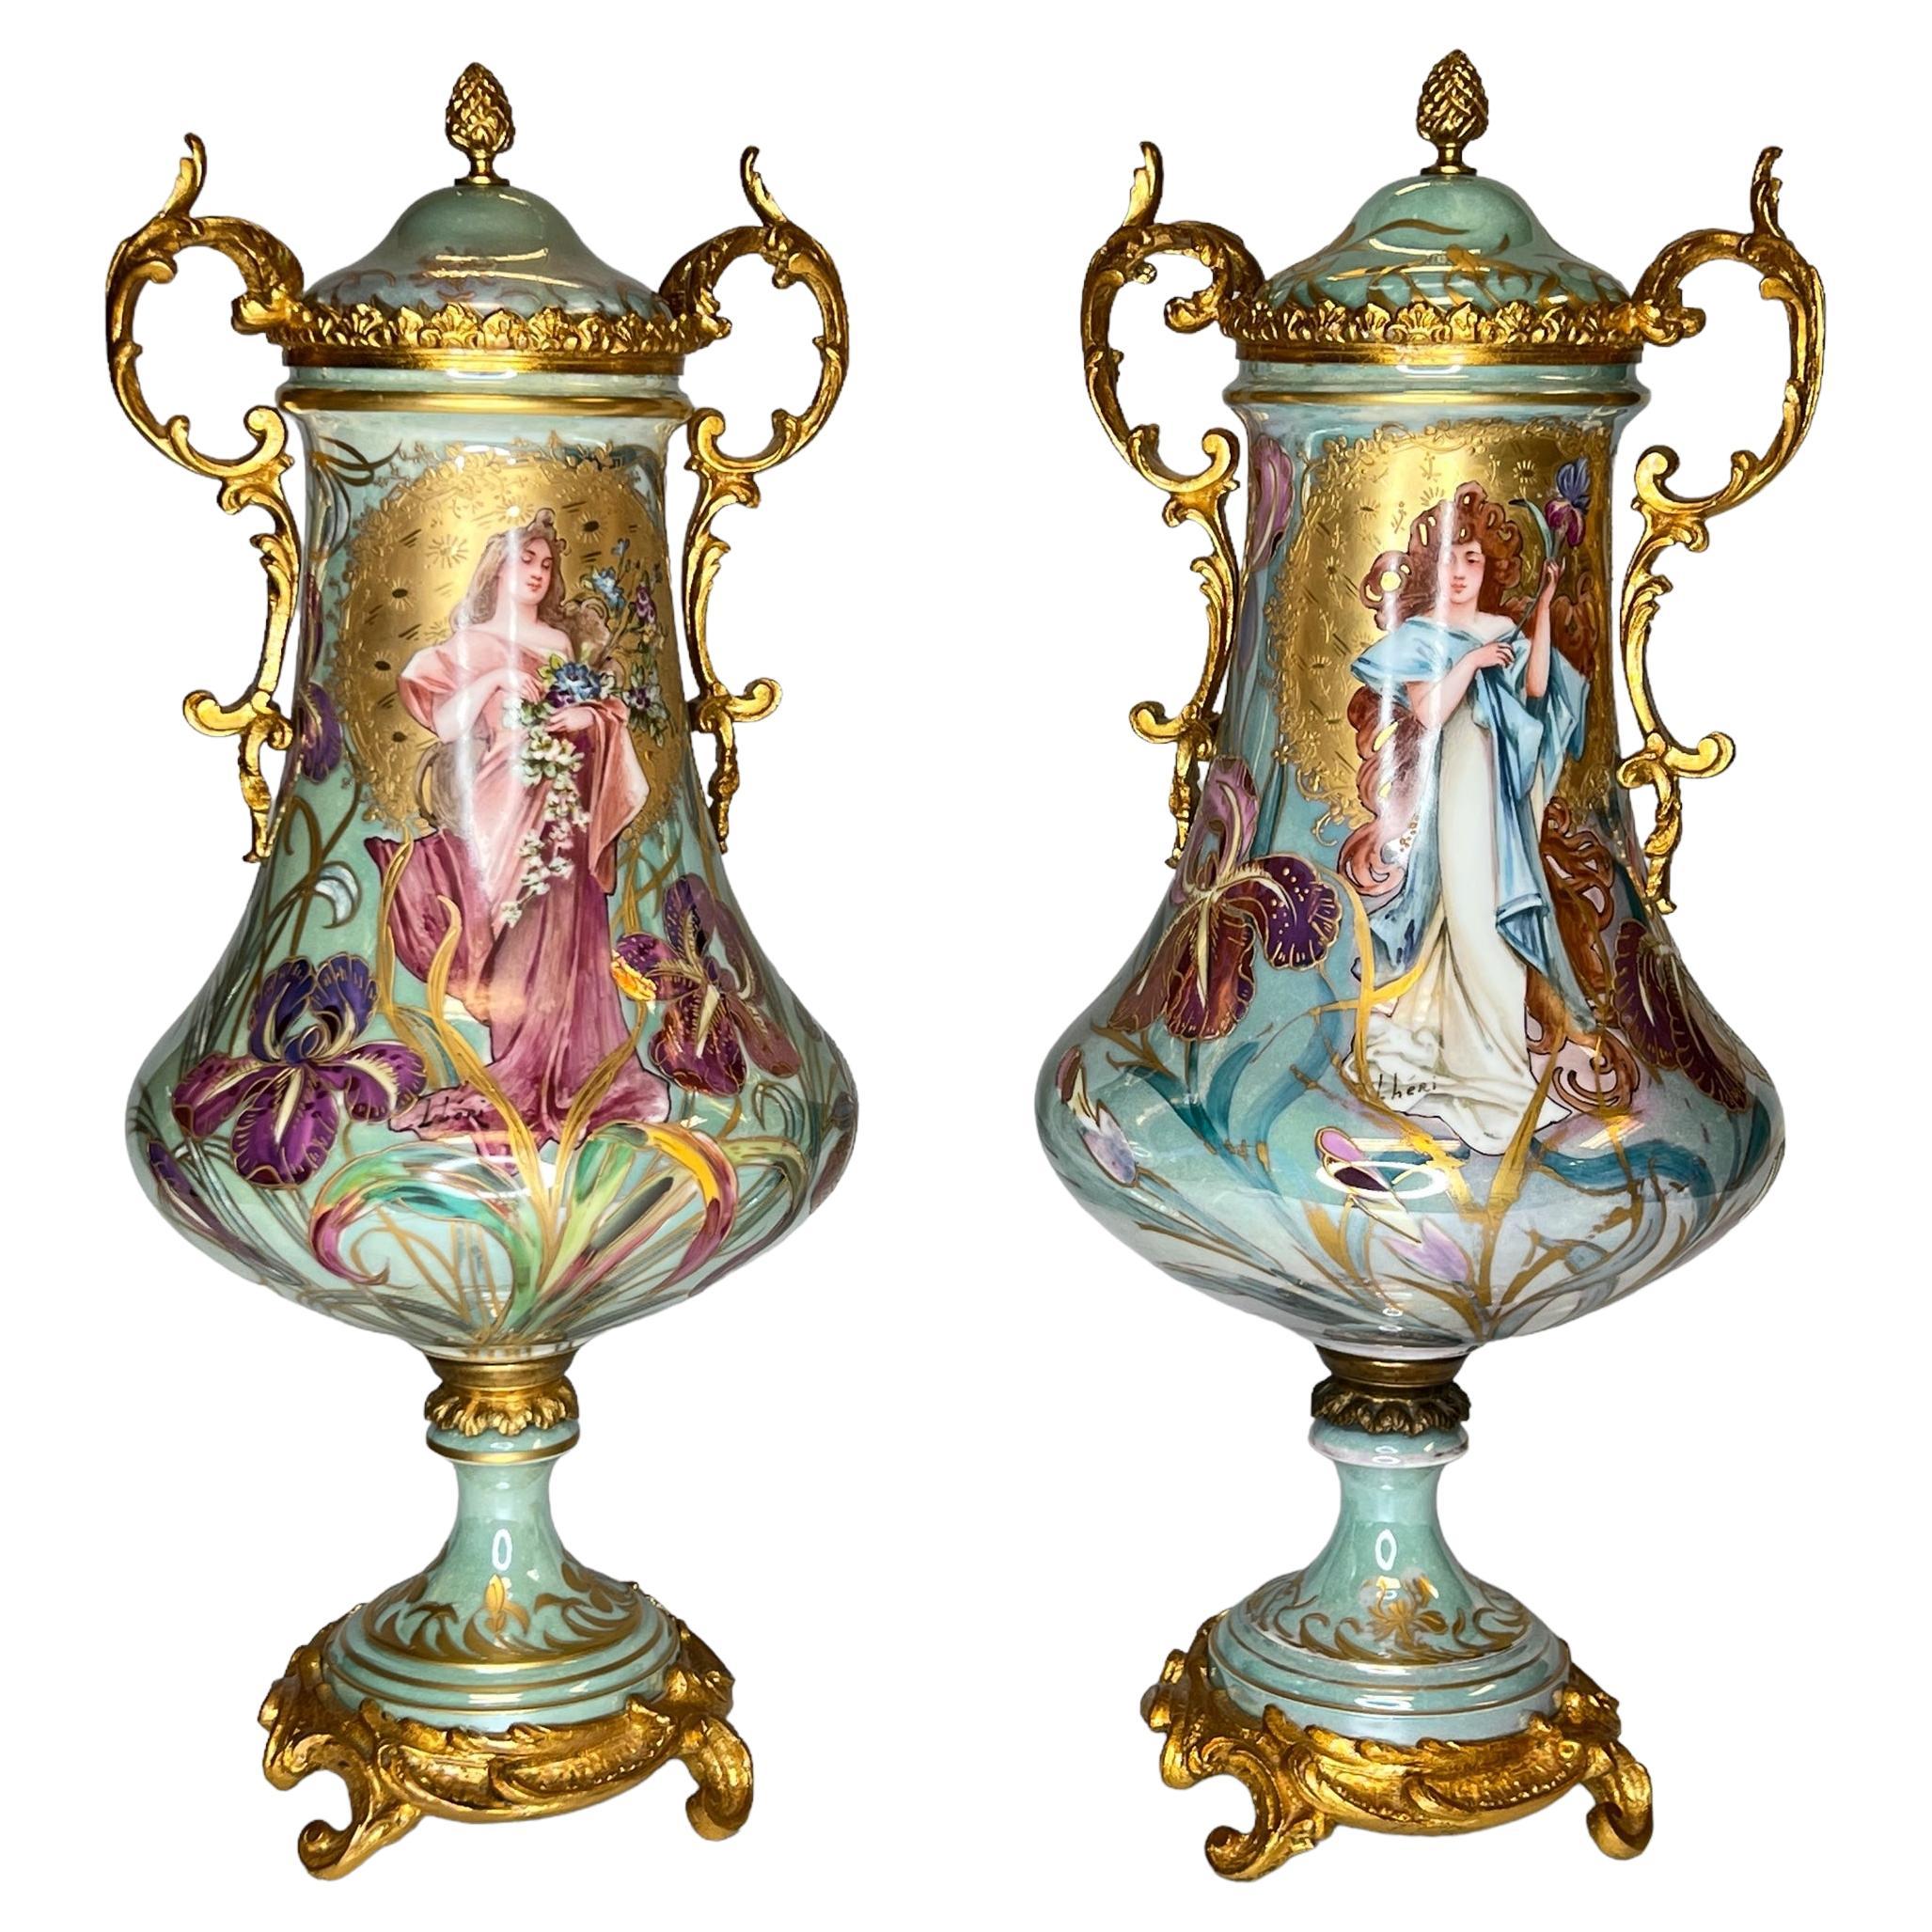 Pair of Art Nouveau Sevres Style Iridescent Porcelain Vases and Covers by Lheri For Sale